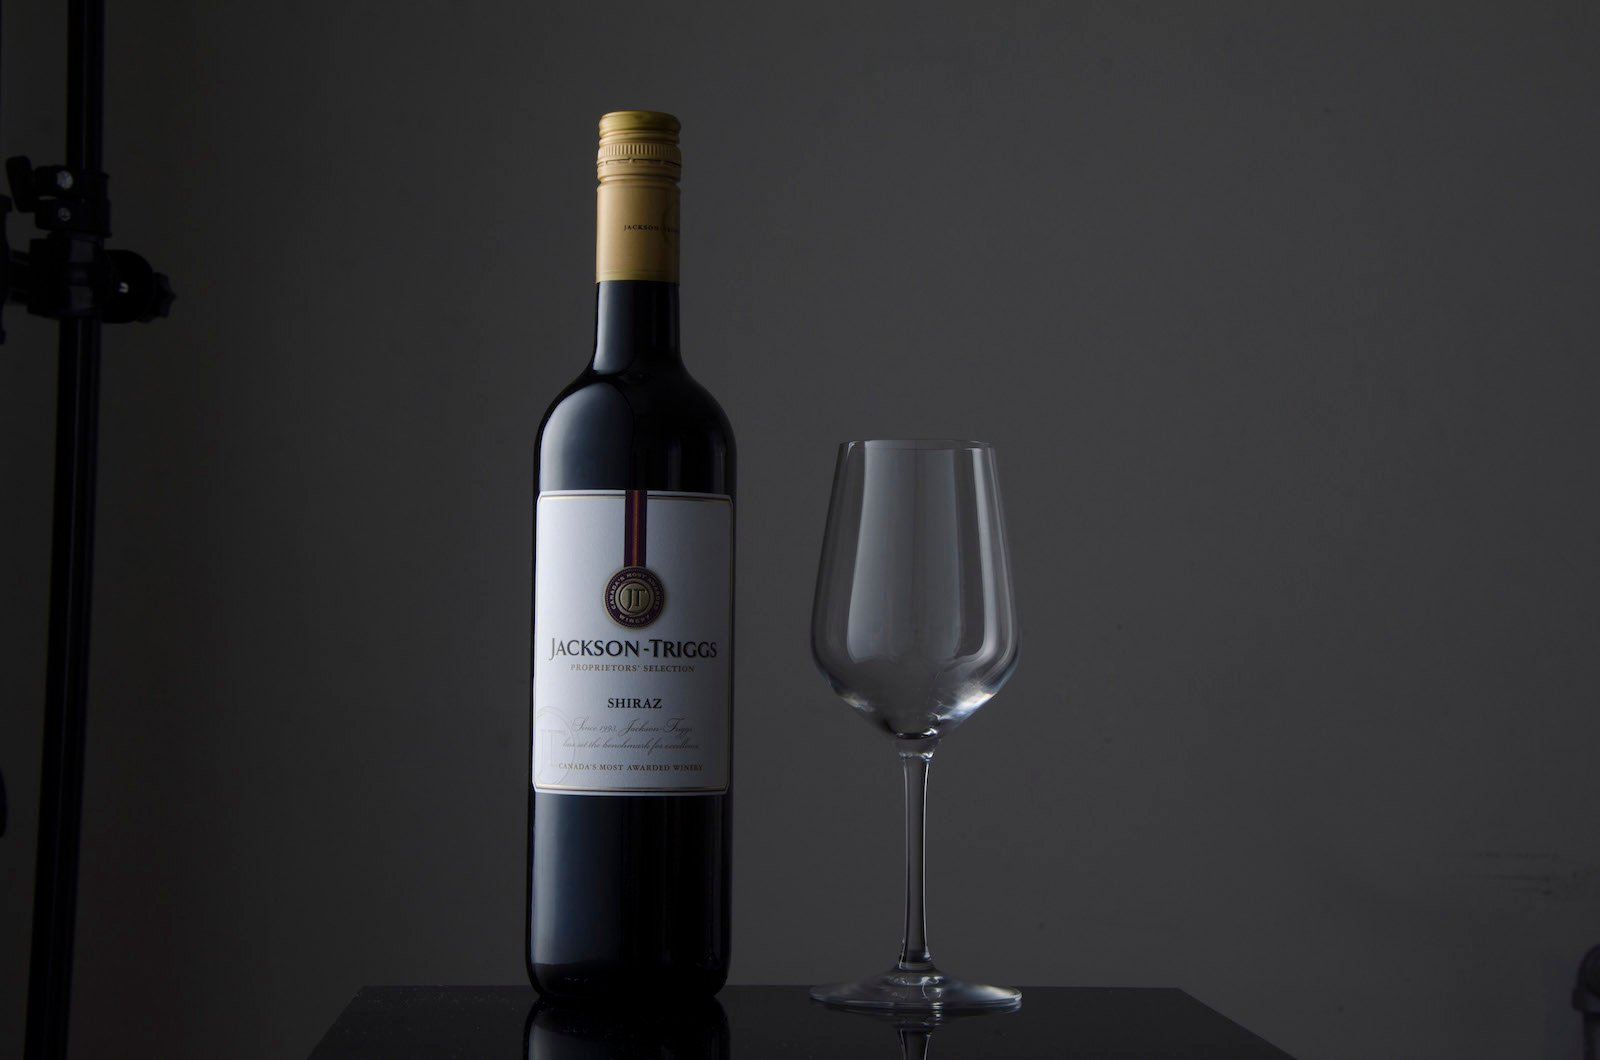 How to Shoot a Professional Wine Photo with Speedlights and a Kit Lens